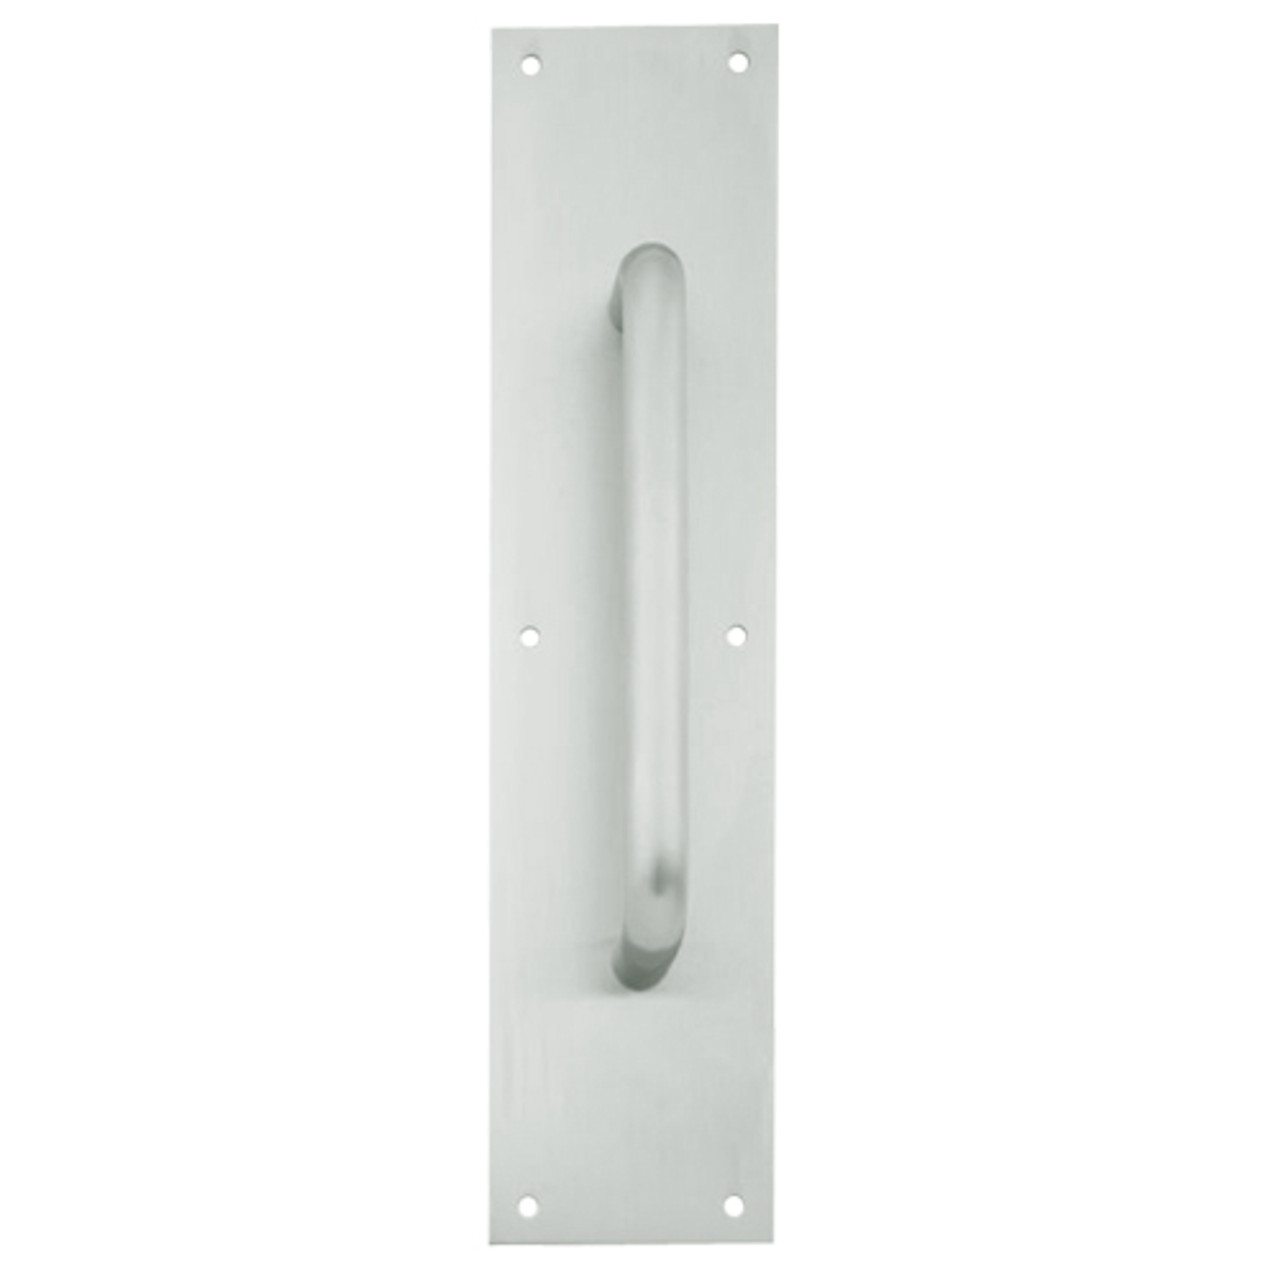 8302-8-US15-3-5x15 IVES Architectural Door Trim 3.5x15 Inch Pull Plate in Satin Nickel